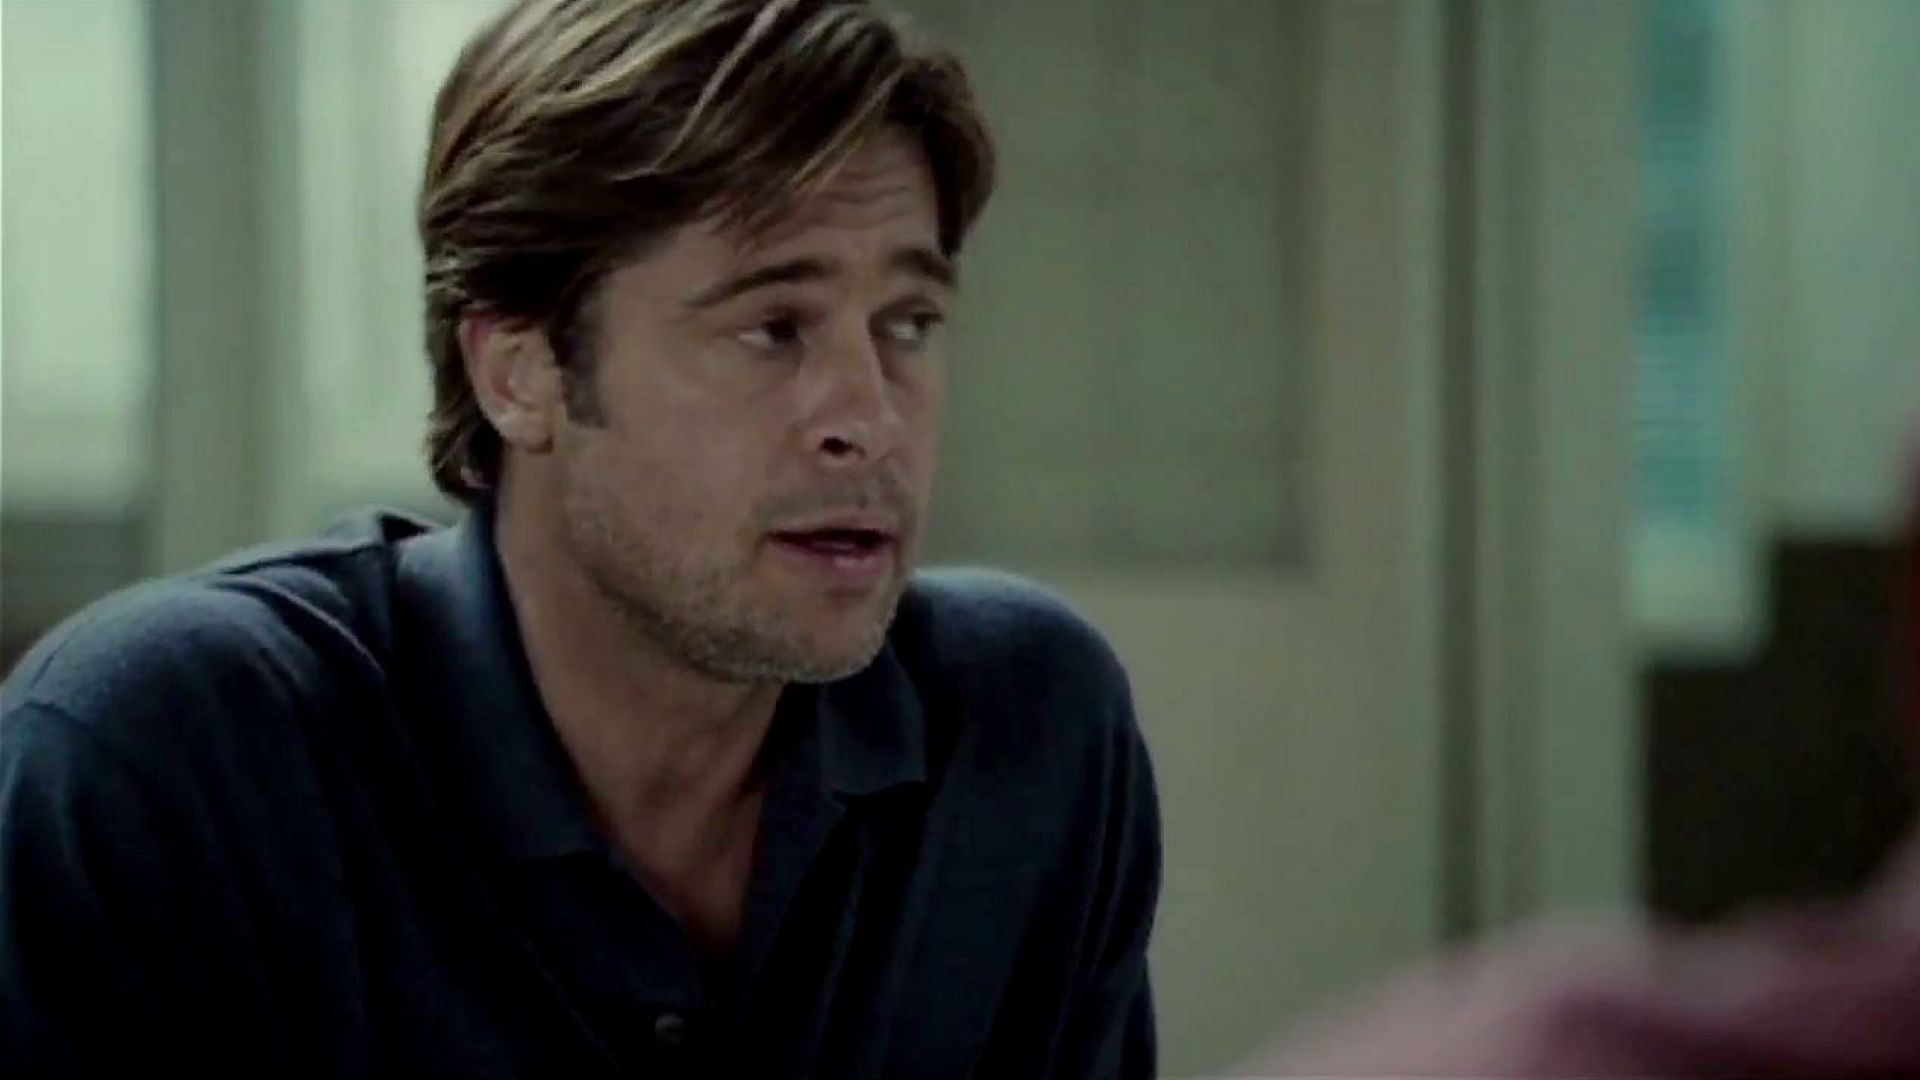 What’s The Problem? - Brad Pitt in Moneyball